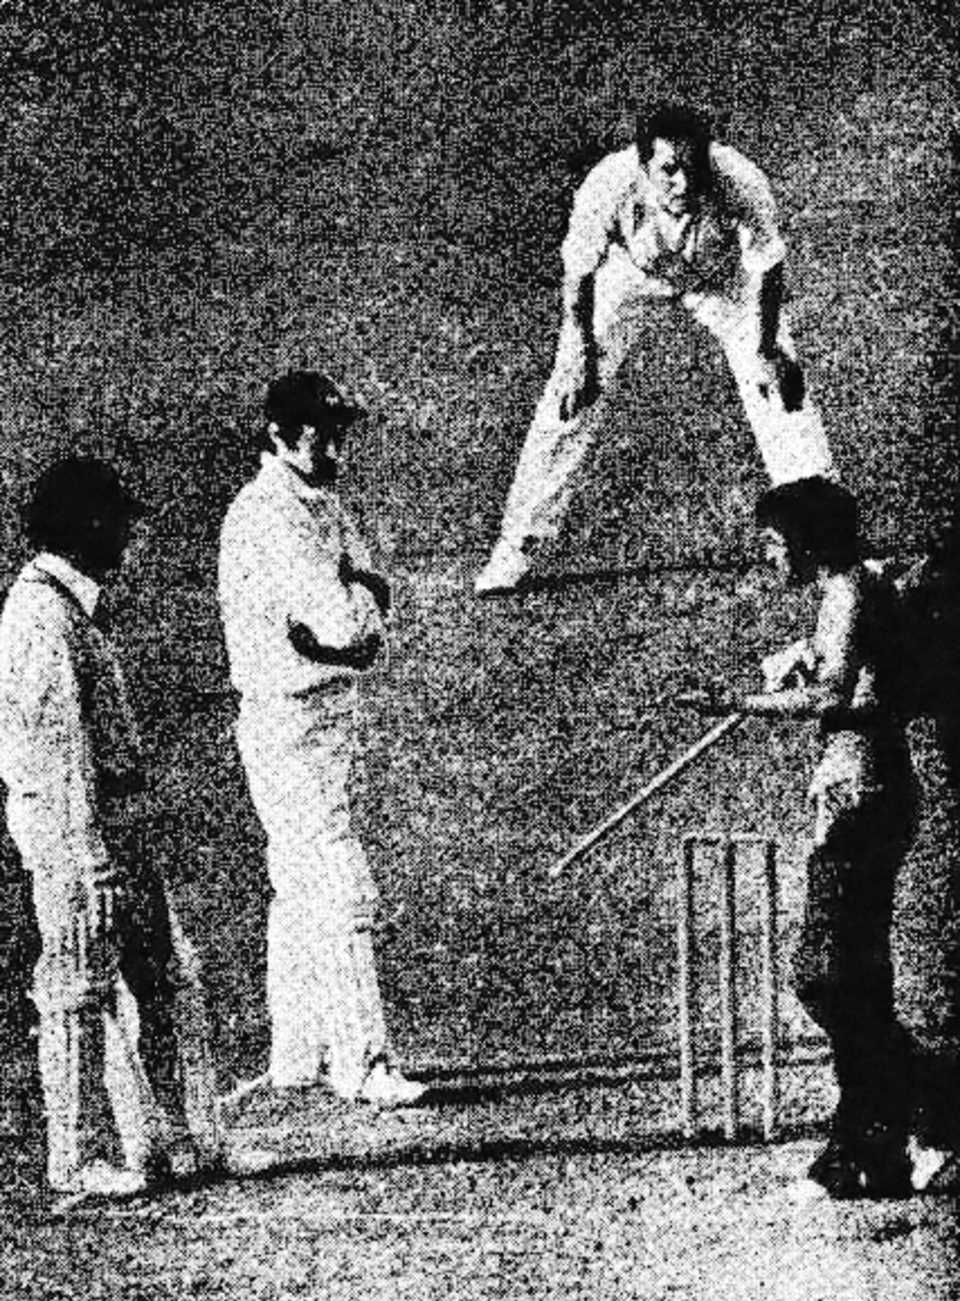 A spectator pleads with Brijesh Patel as India's innings crawls on, England v India, Lord's, World Cup, June 7, 1975